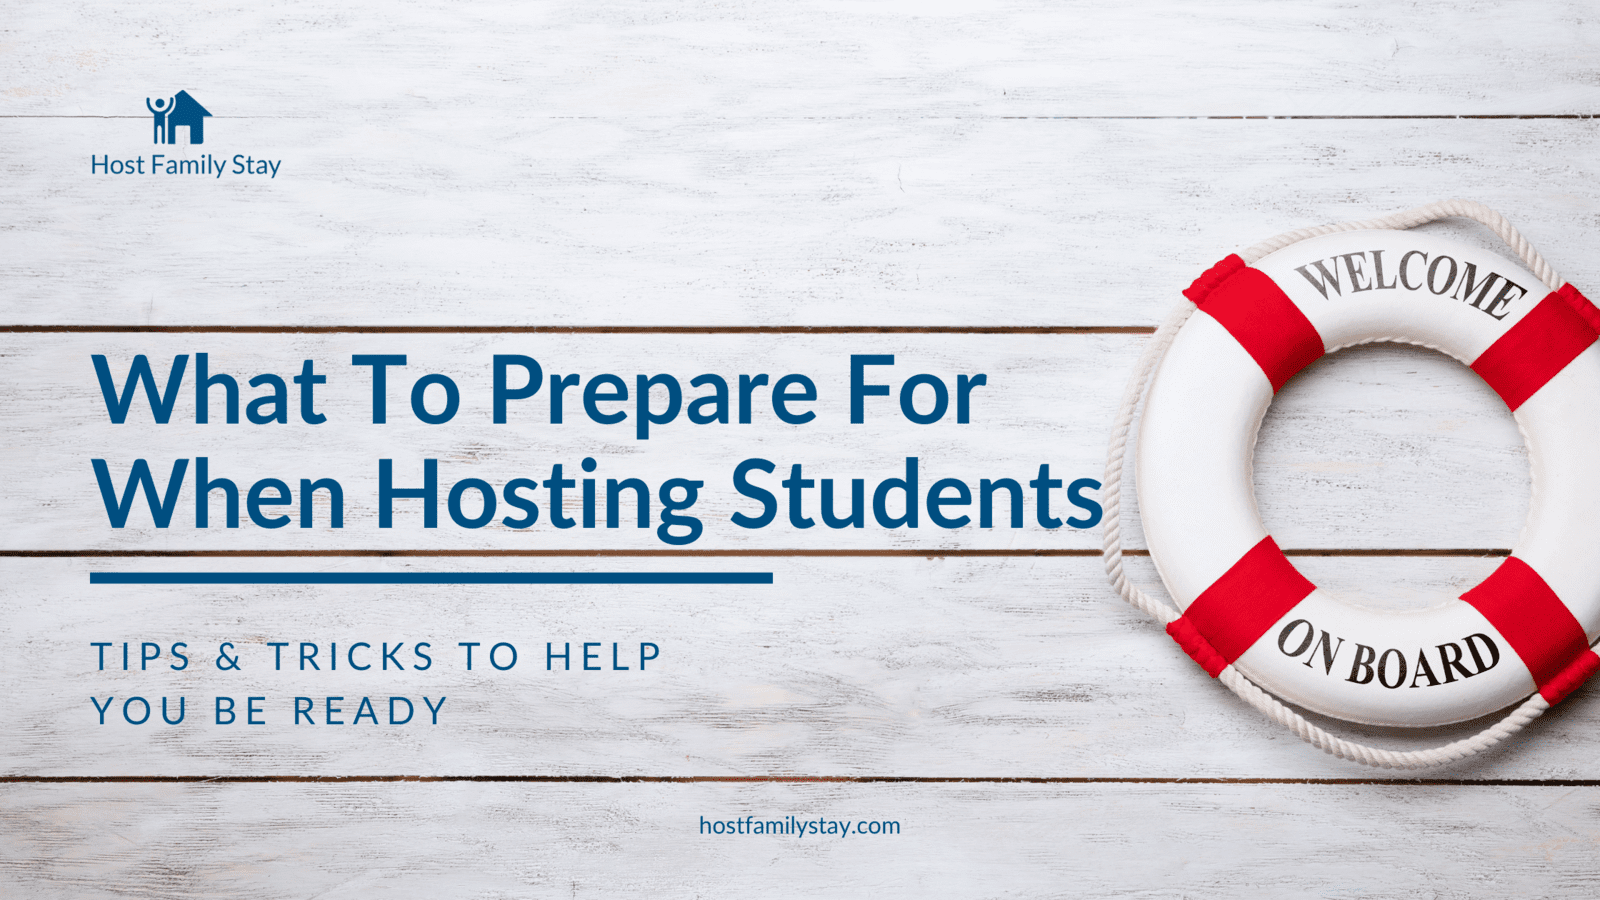 What To Prepare For When Hosting Students